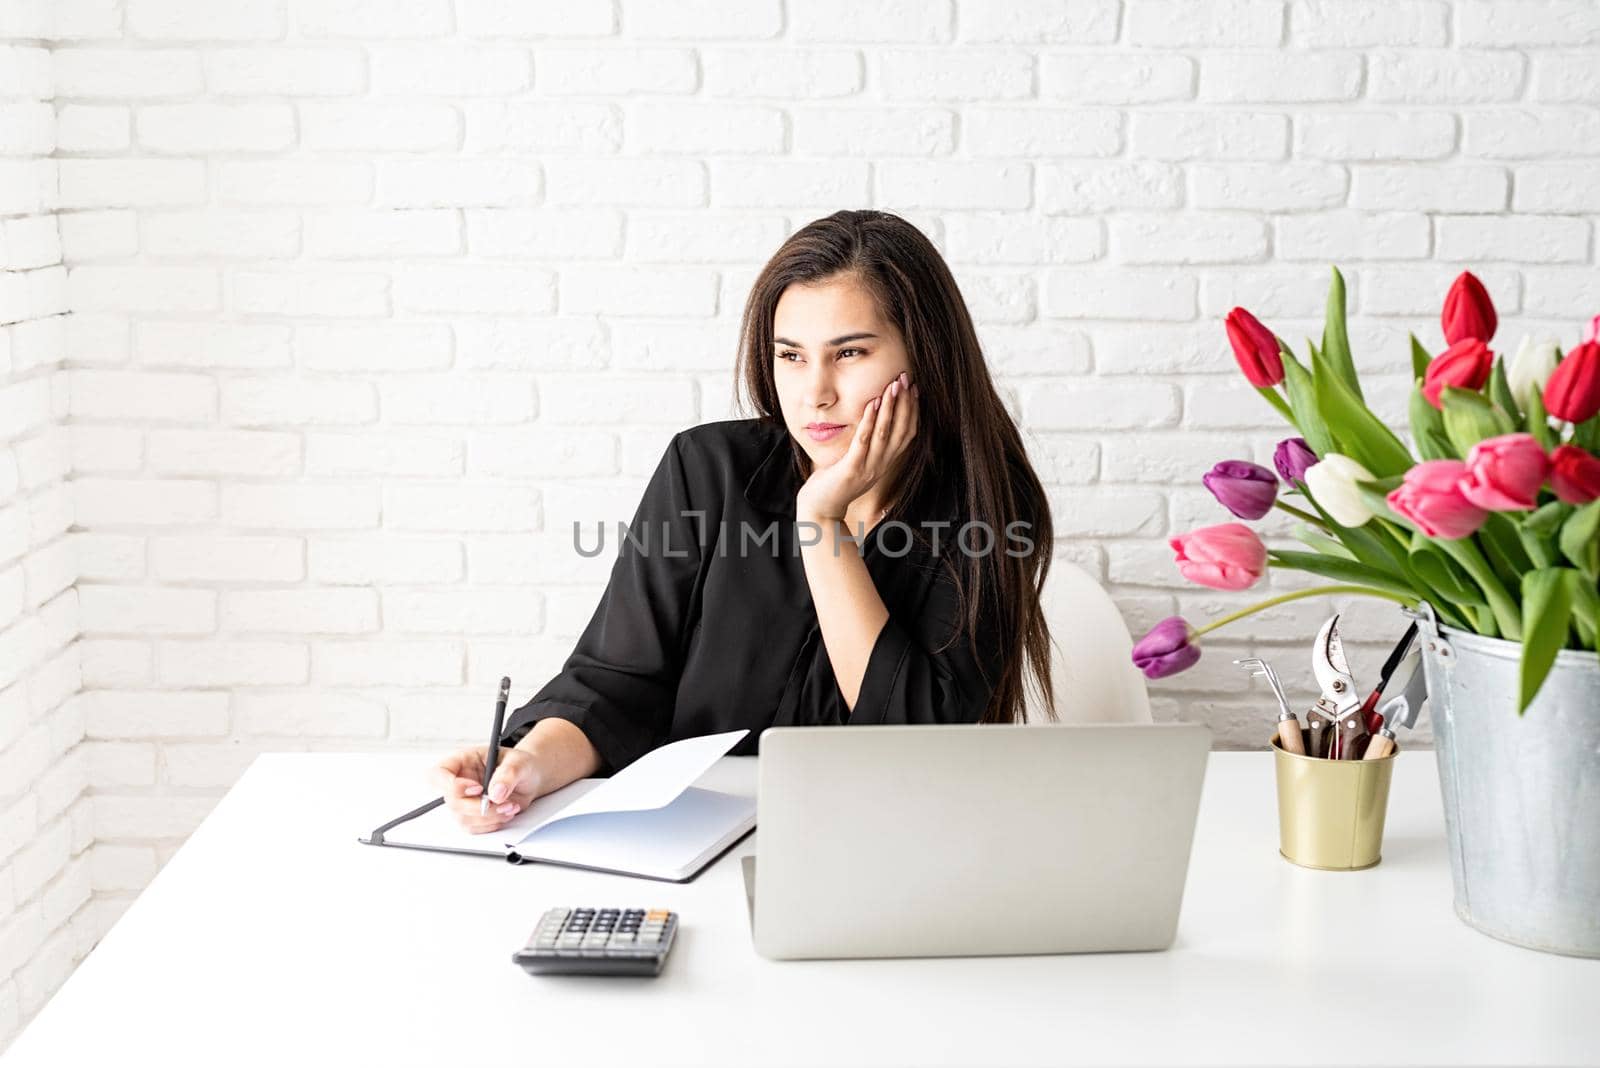 A young business woman florist writing in notebook, using laptop in the office, bucket of tulips on the desk. Small business.